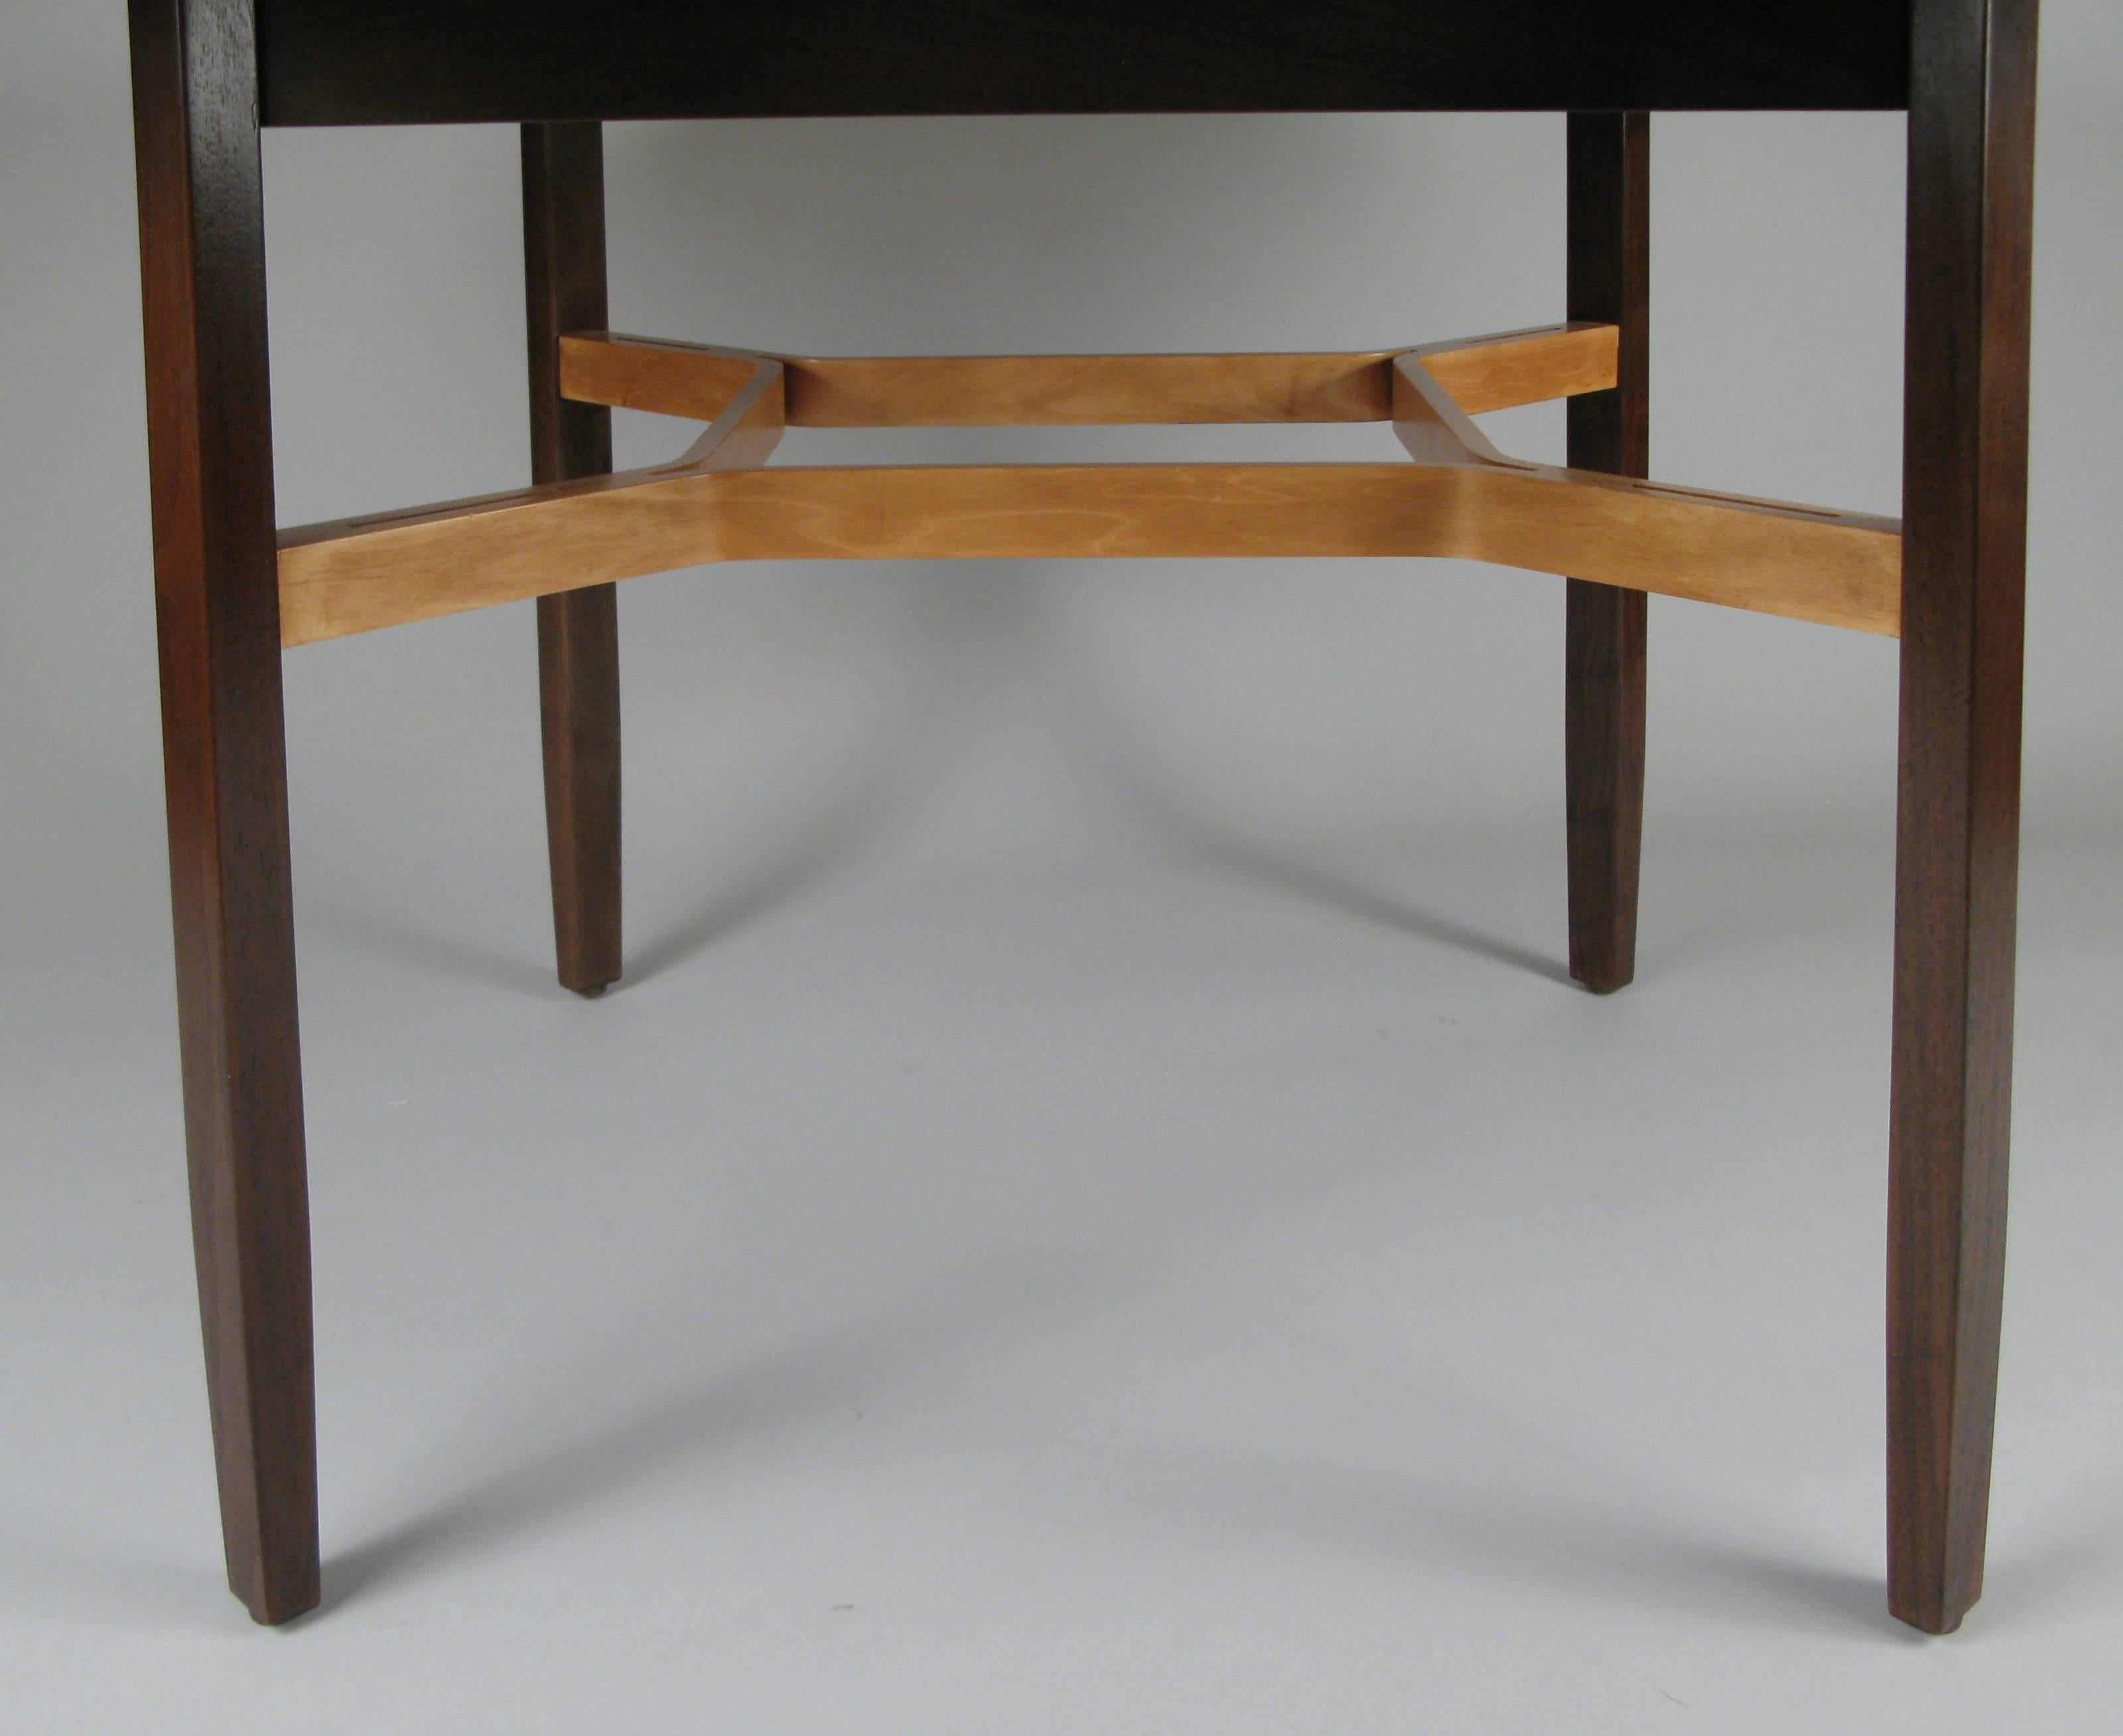 A very handsome vintage 1950s round dining table in walnut with birch stretcher. Designed by Lewis Butler for Knoll, with an early Knoll label, this beautiful table is in mint condition.